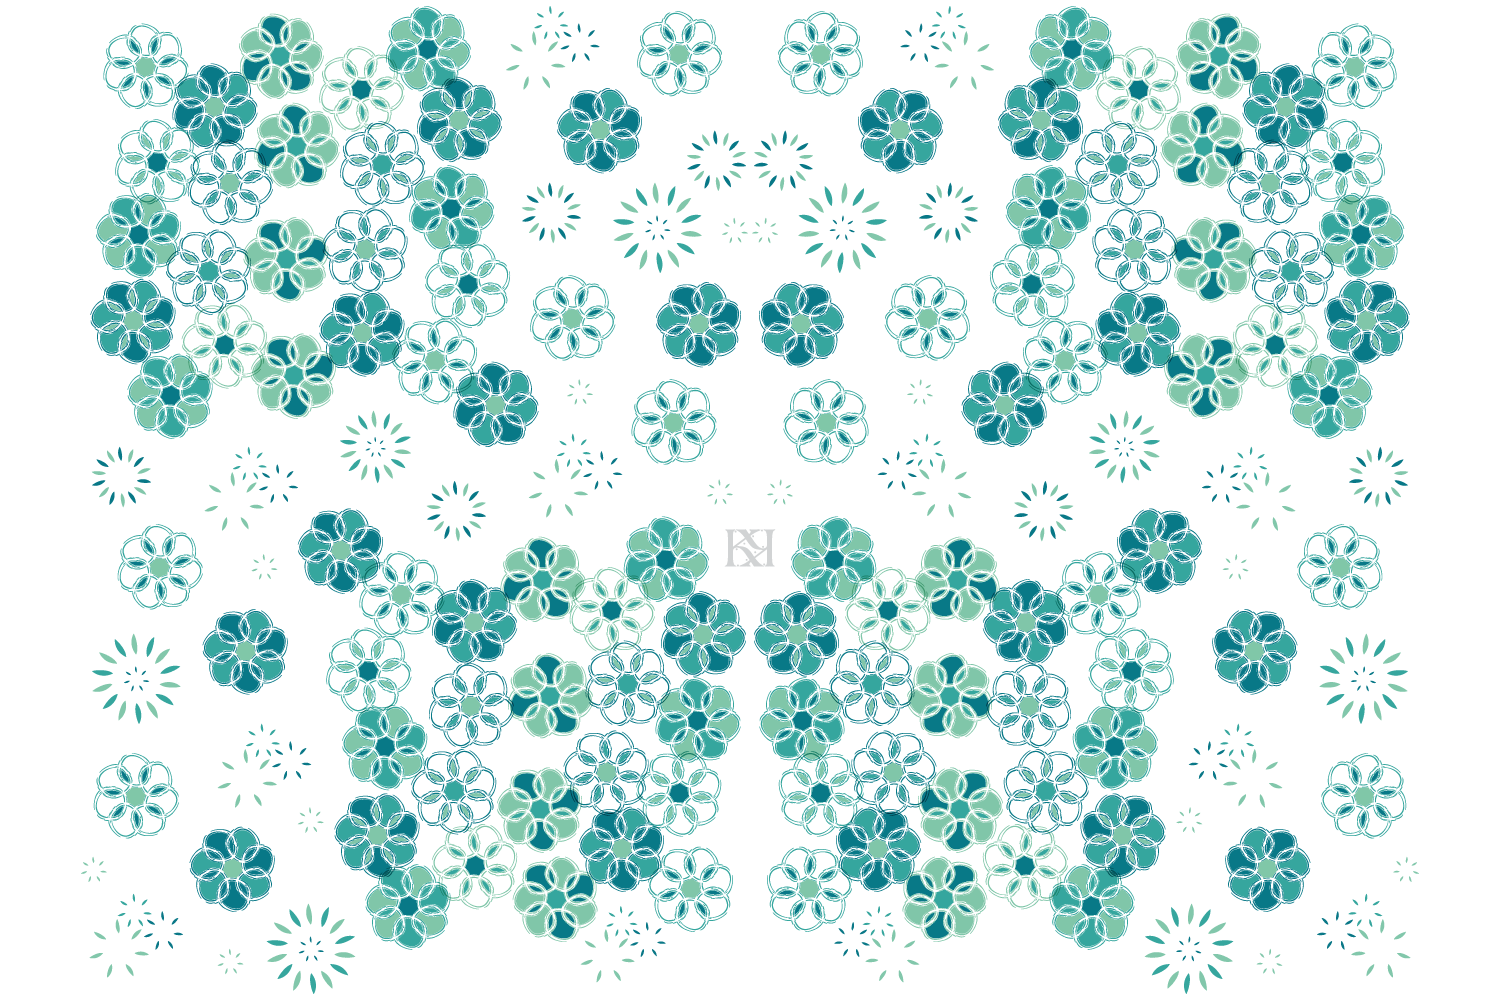 Green_Teal_Flowers_Ornate_1500px_x_1000px-02.png